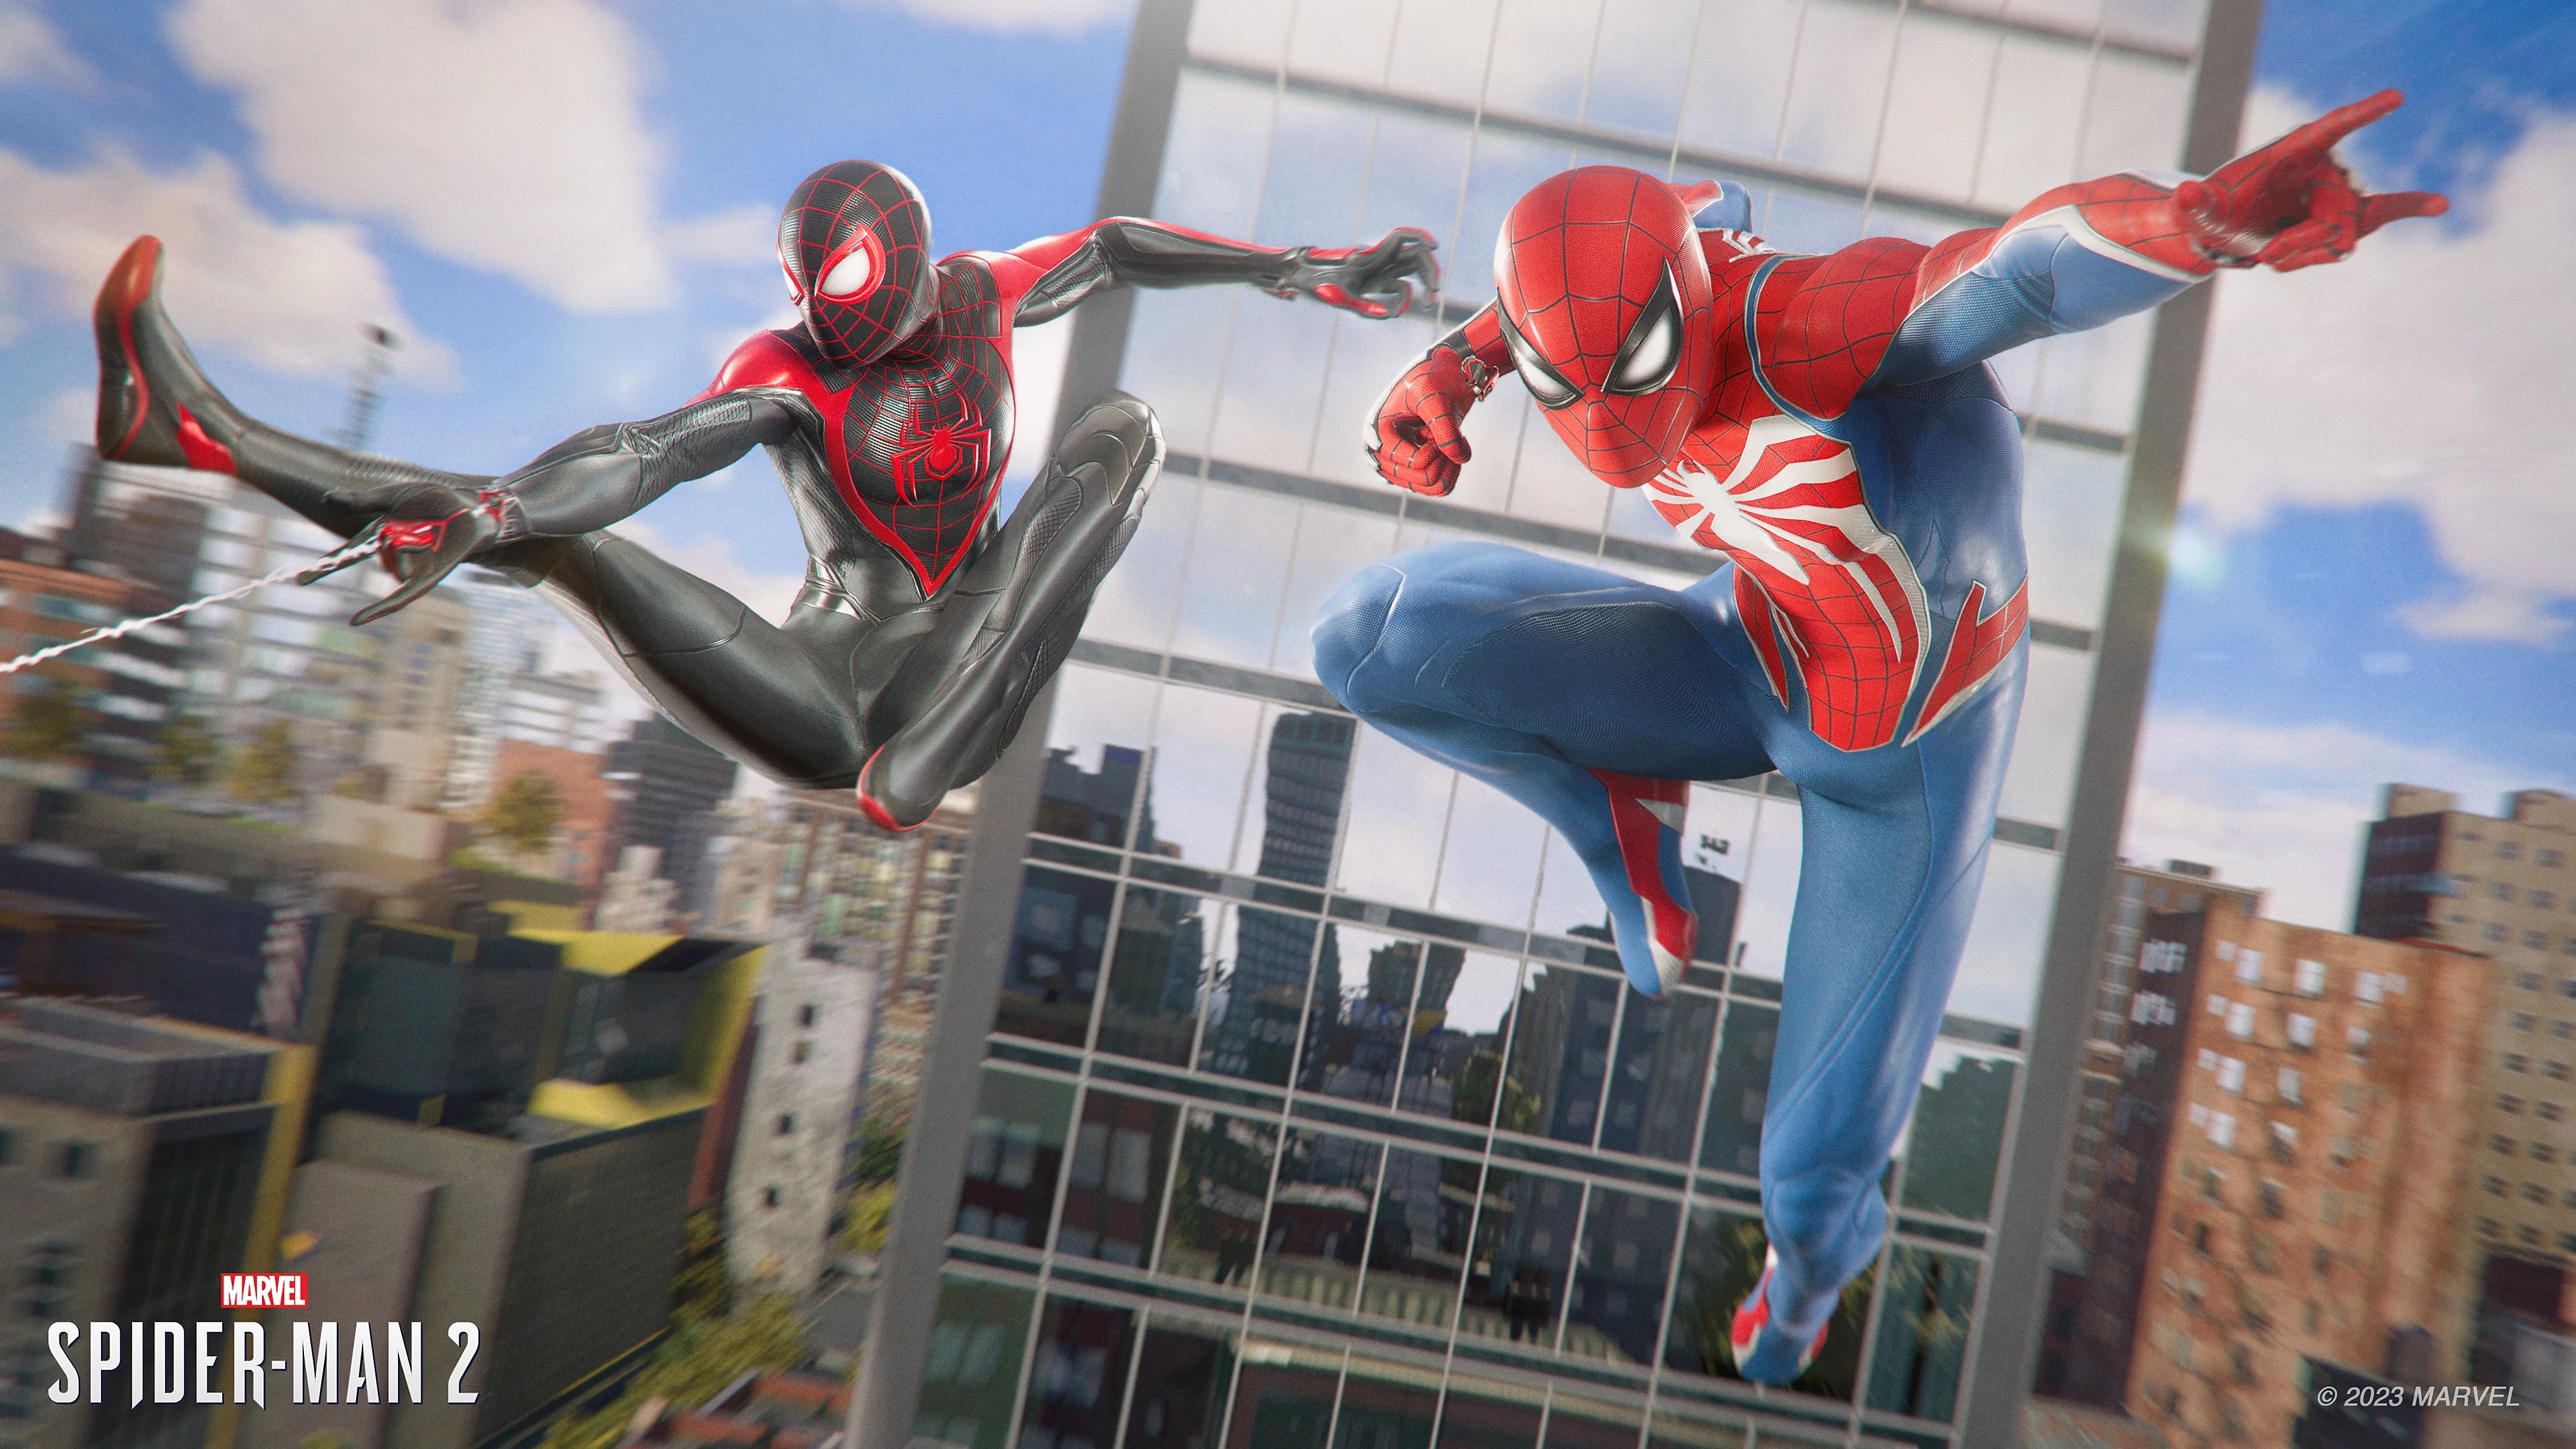 Spider-Man 2's new story trailer and PS5 bundle are consumed by